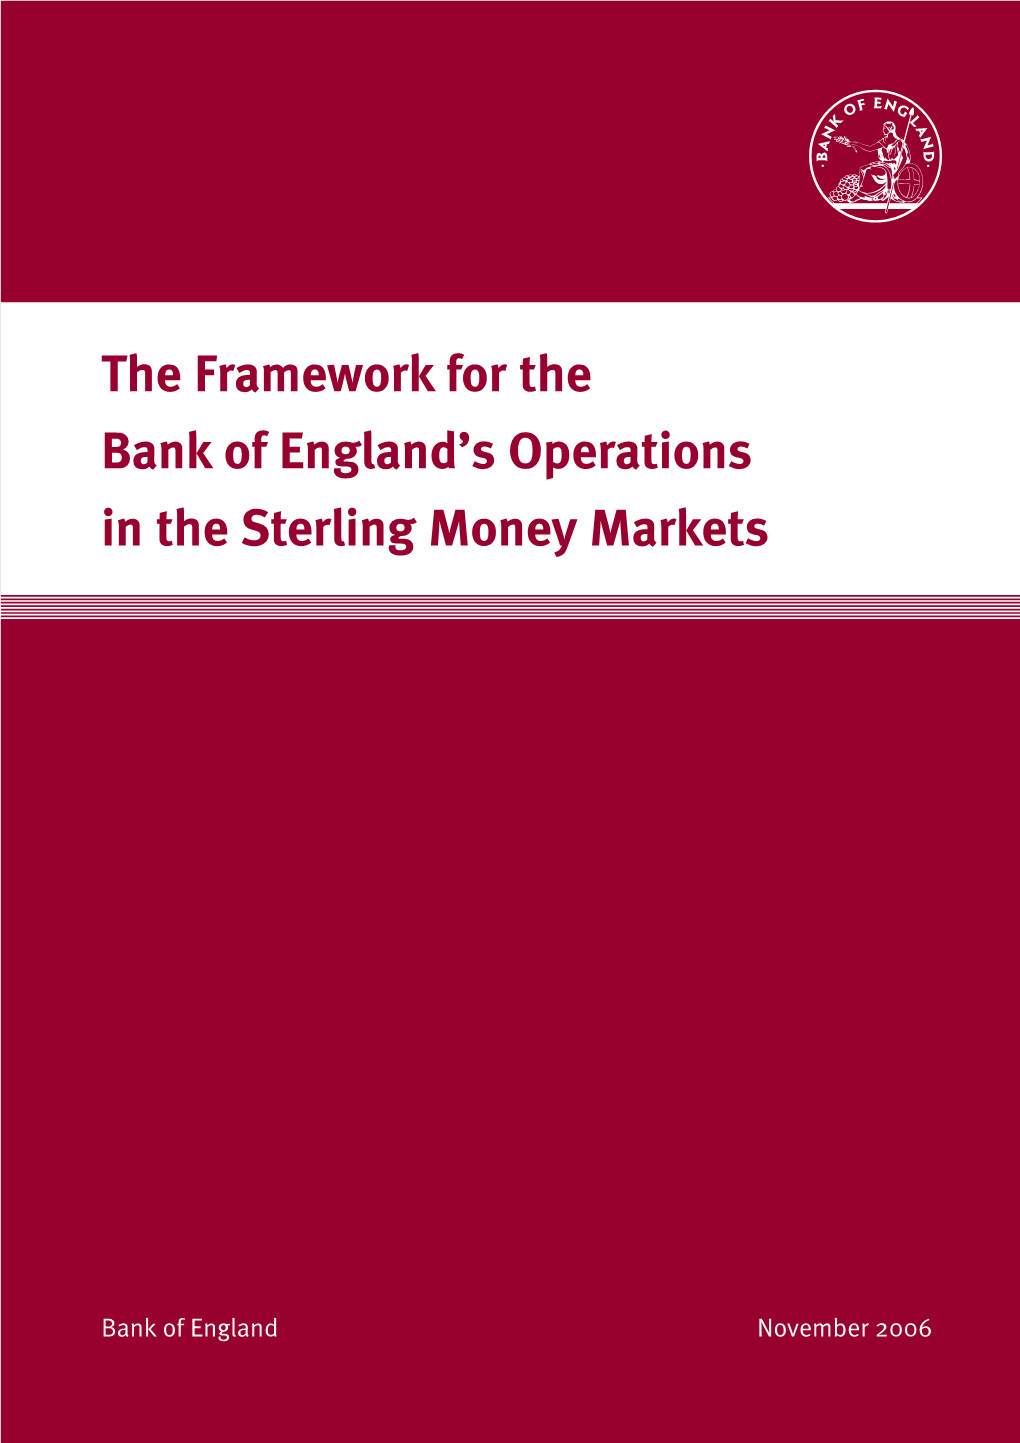 The Framework for the Bank of England's Operations in the Sterling Money Markets (The 'Red Book')